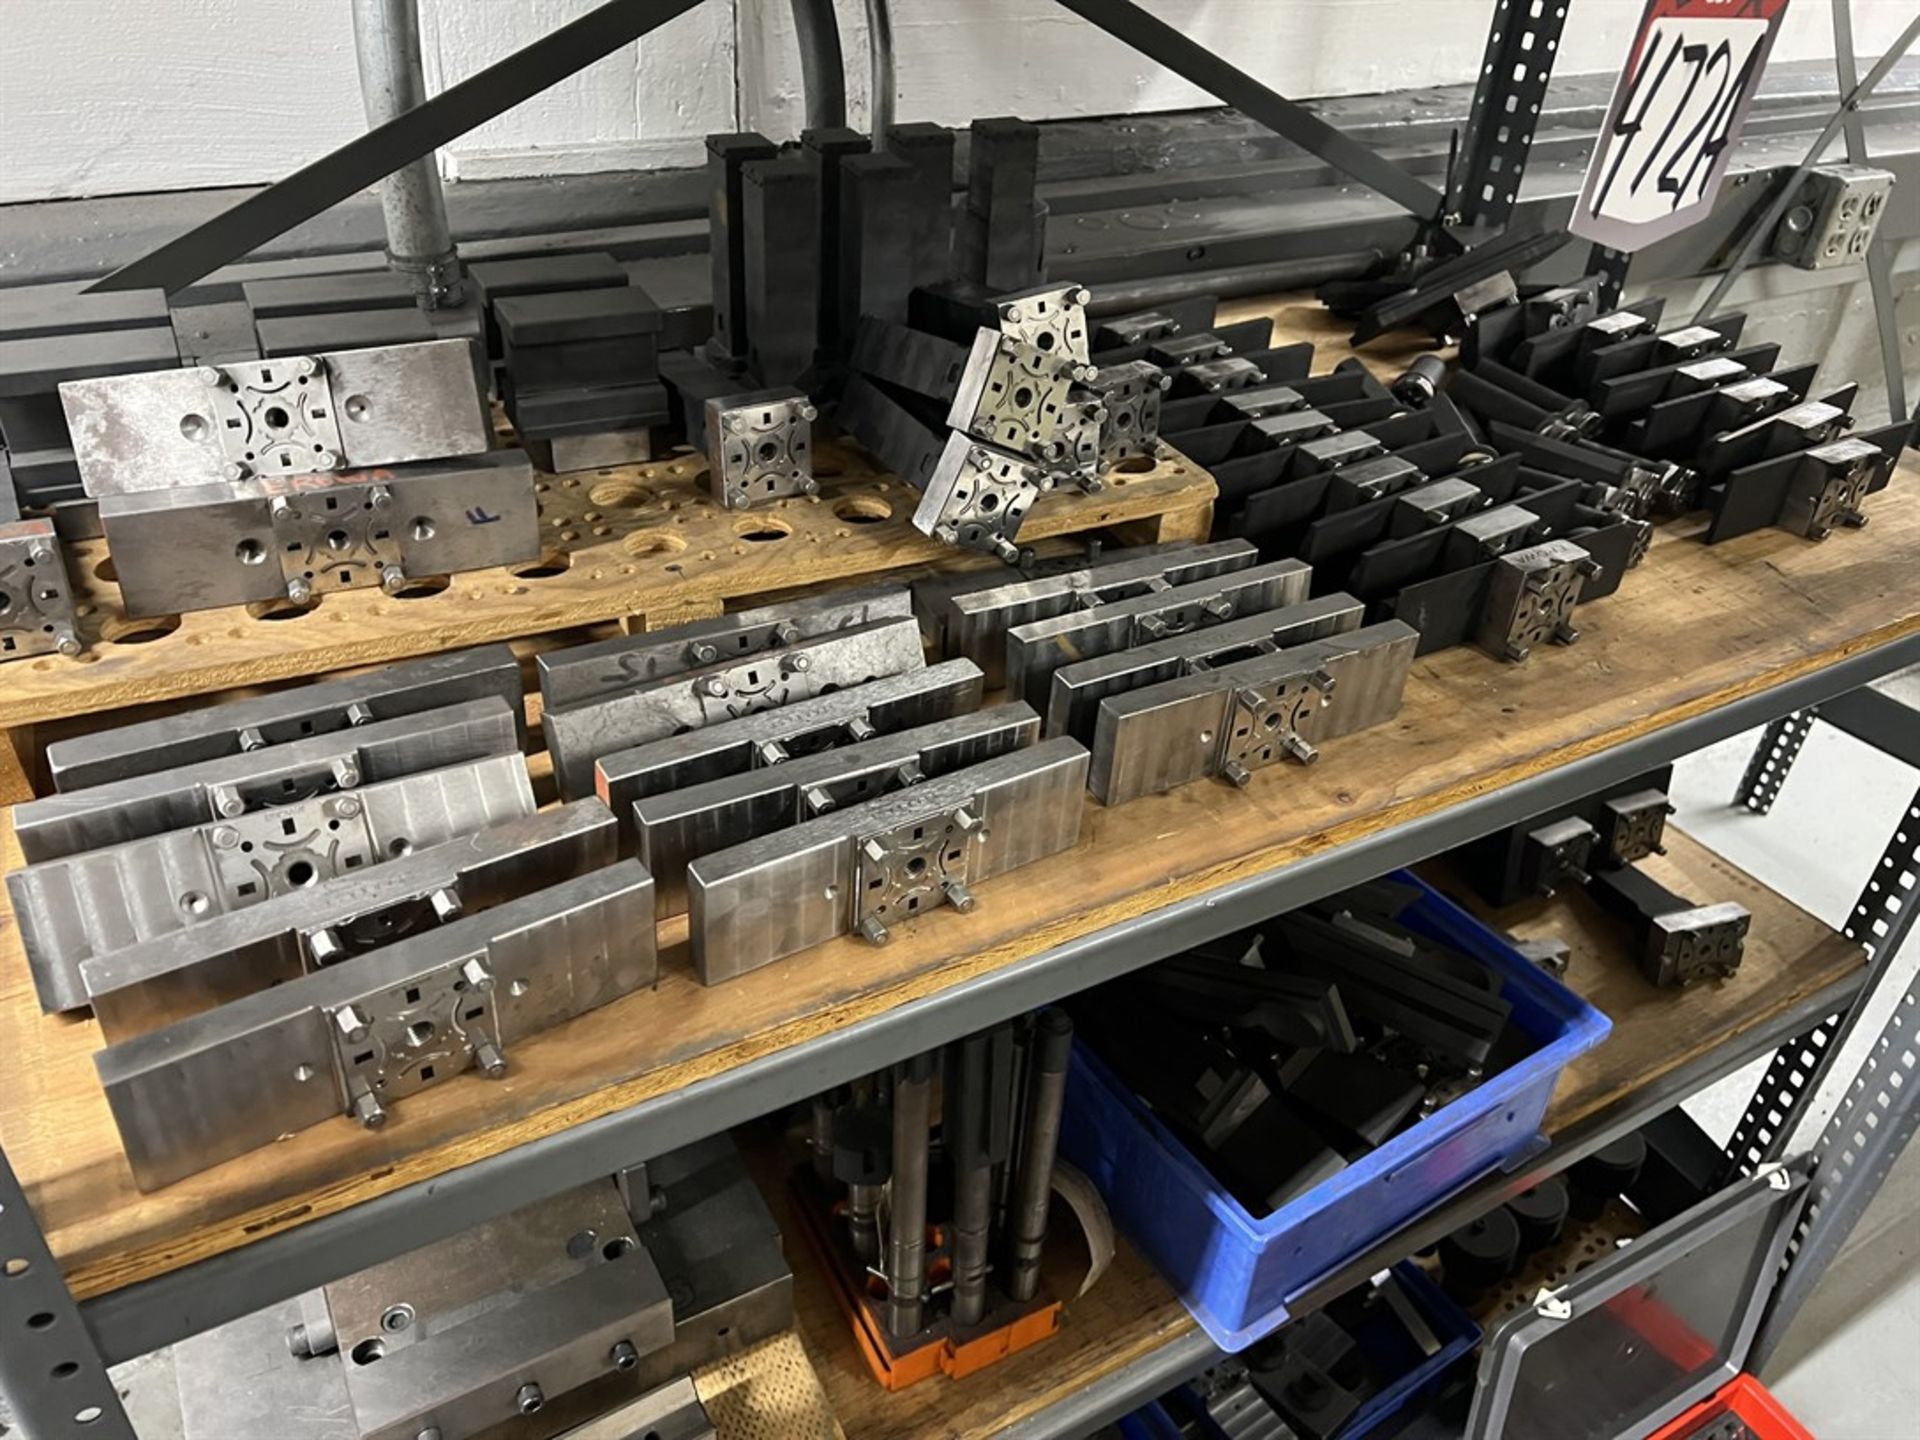 Rack of Assorted EROWA EDM Tooling, Fixtures, and Electrodes - Image 3 of 5